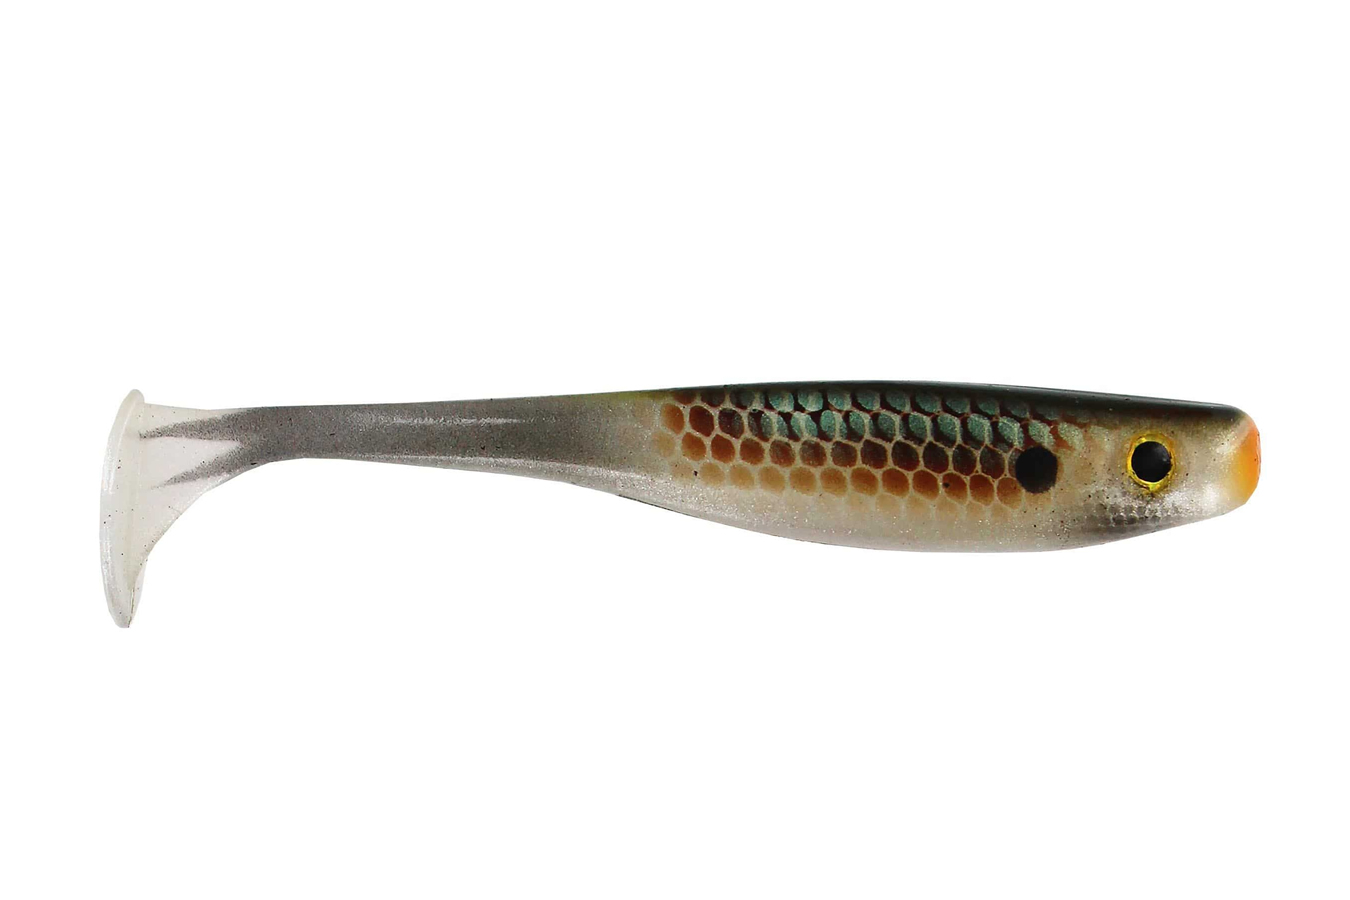 Discount Big Bite Baits 3.5 Inch Suicide Shad Gillateen for Sale